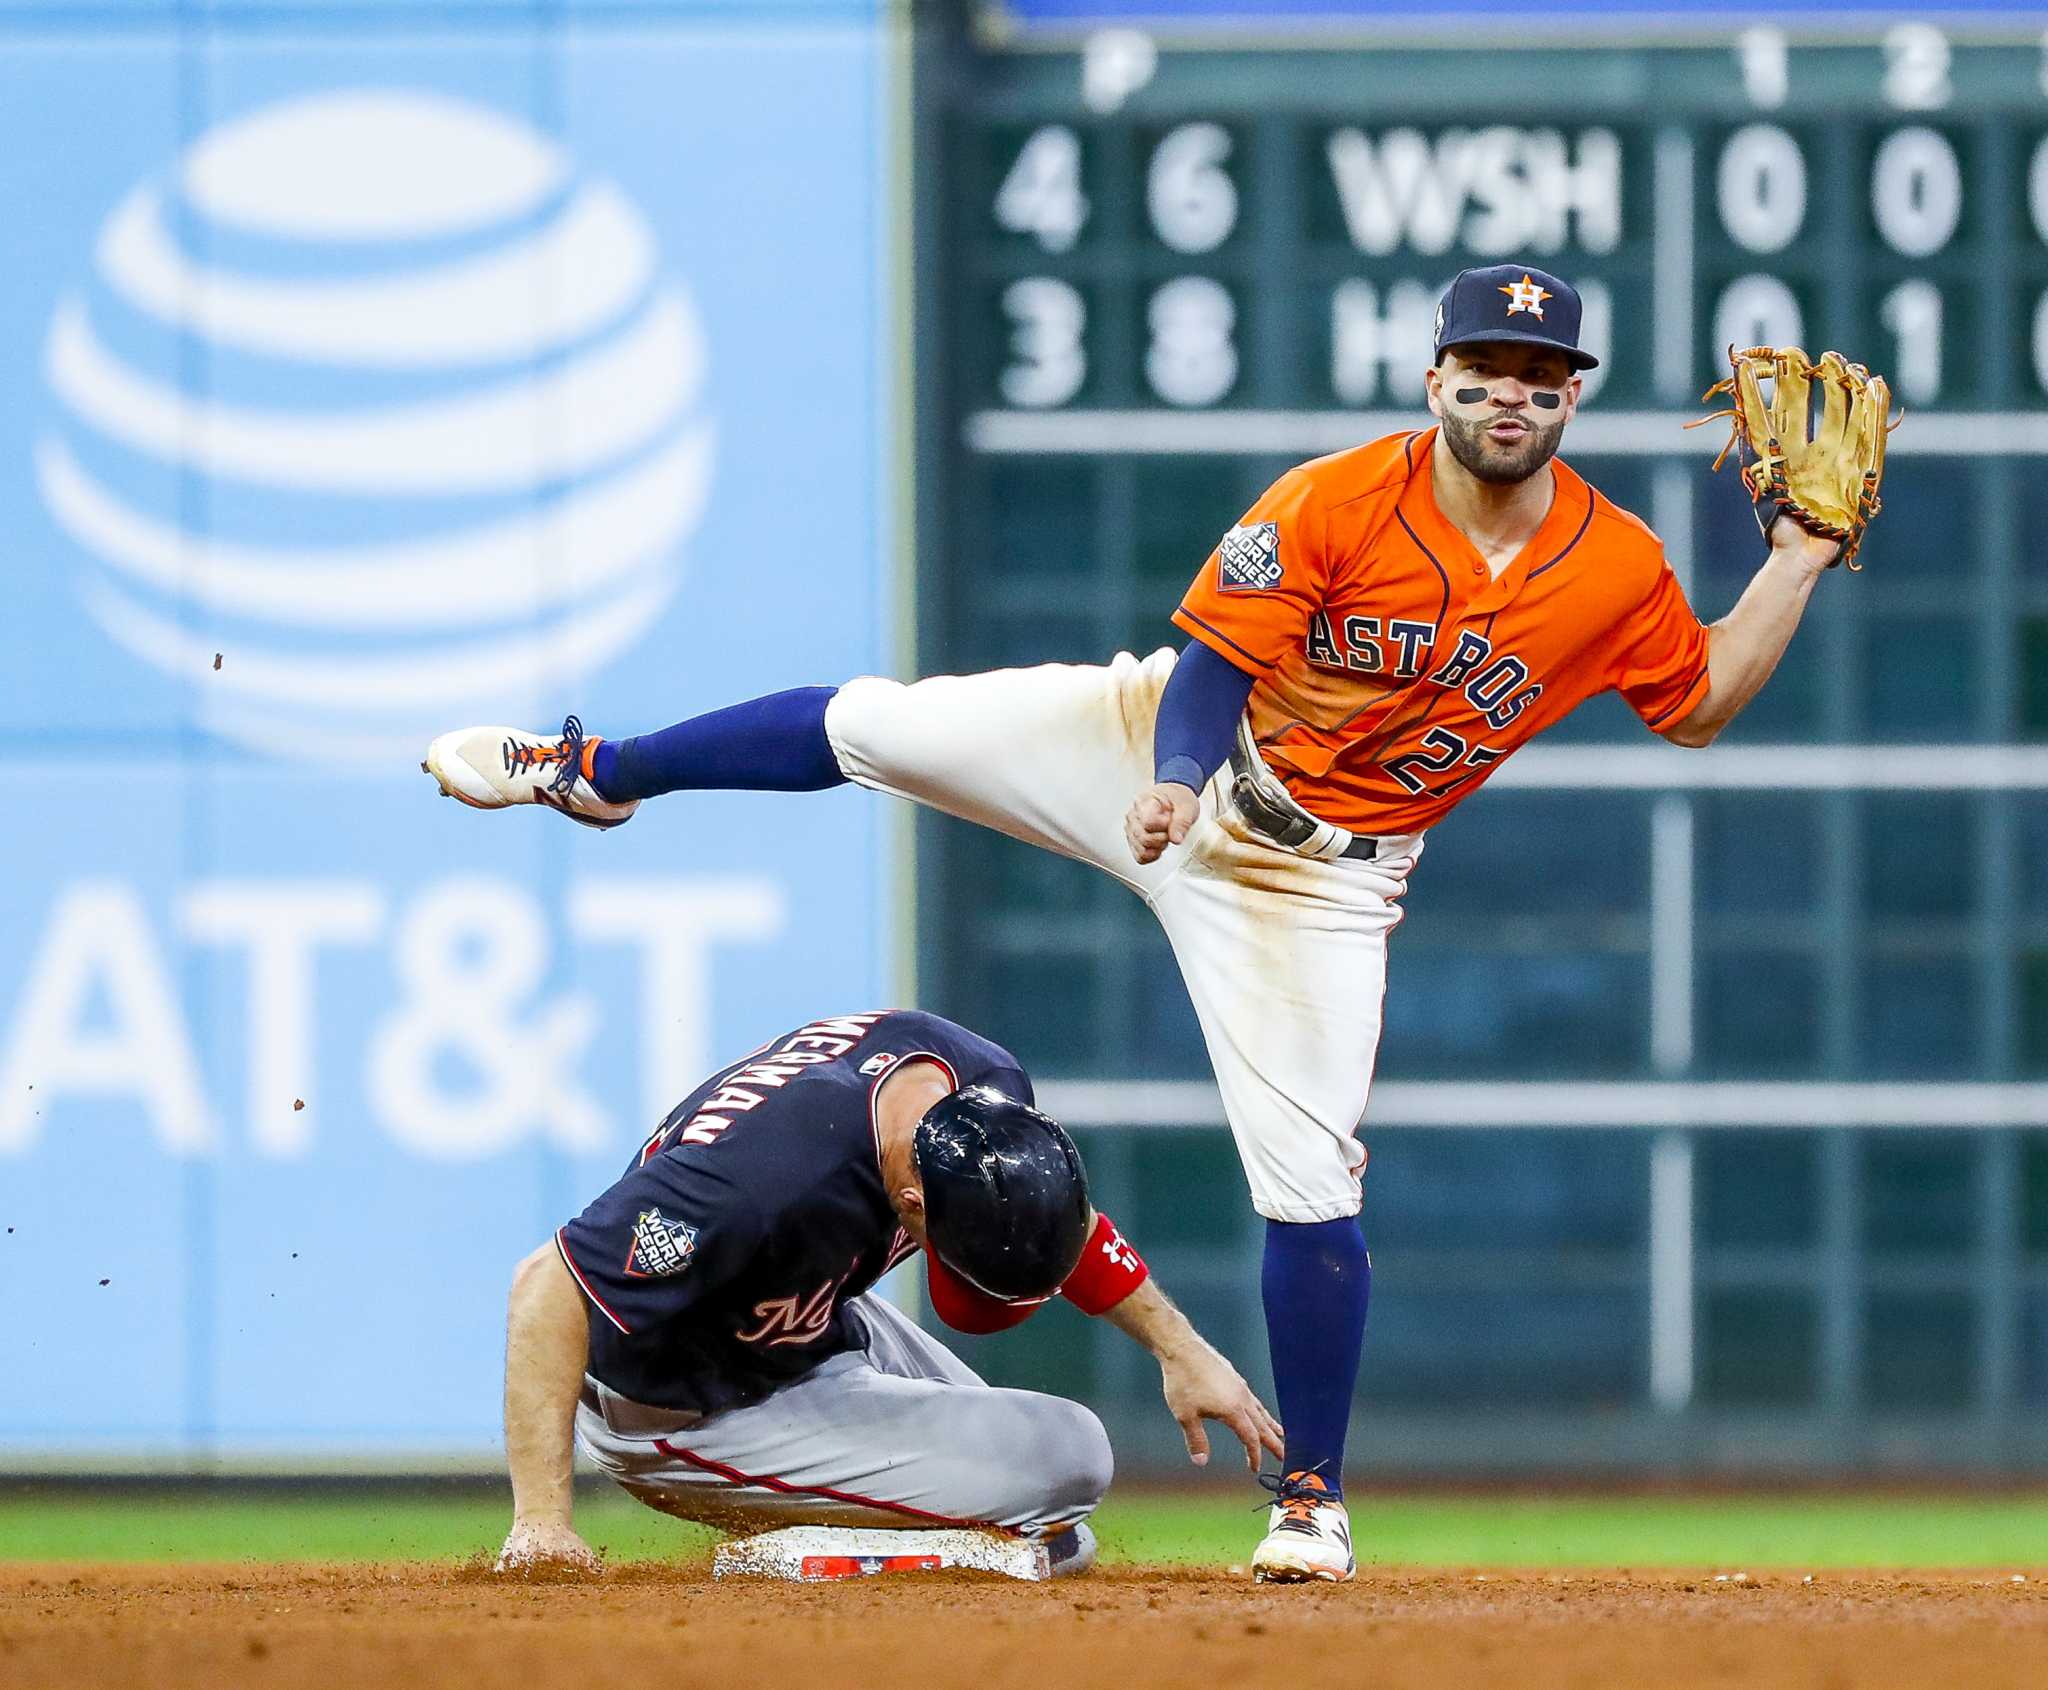 02 October 2016: Houston Astros Second base Jose Altuve (27) gets a hug  from a teammate after his hit in the 9th inning won him the batting title  in the game against